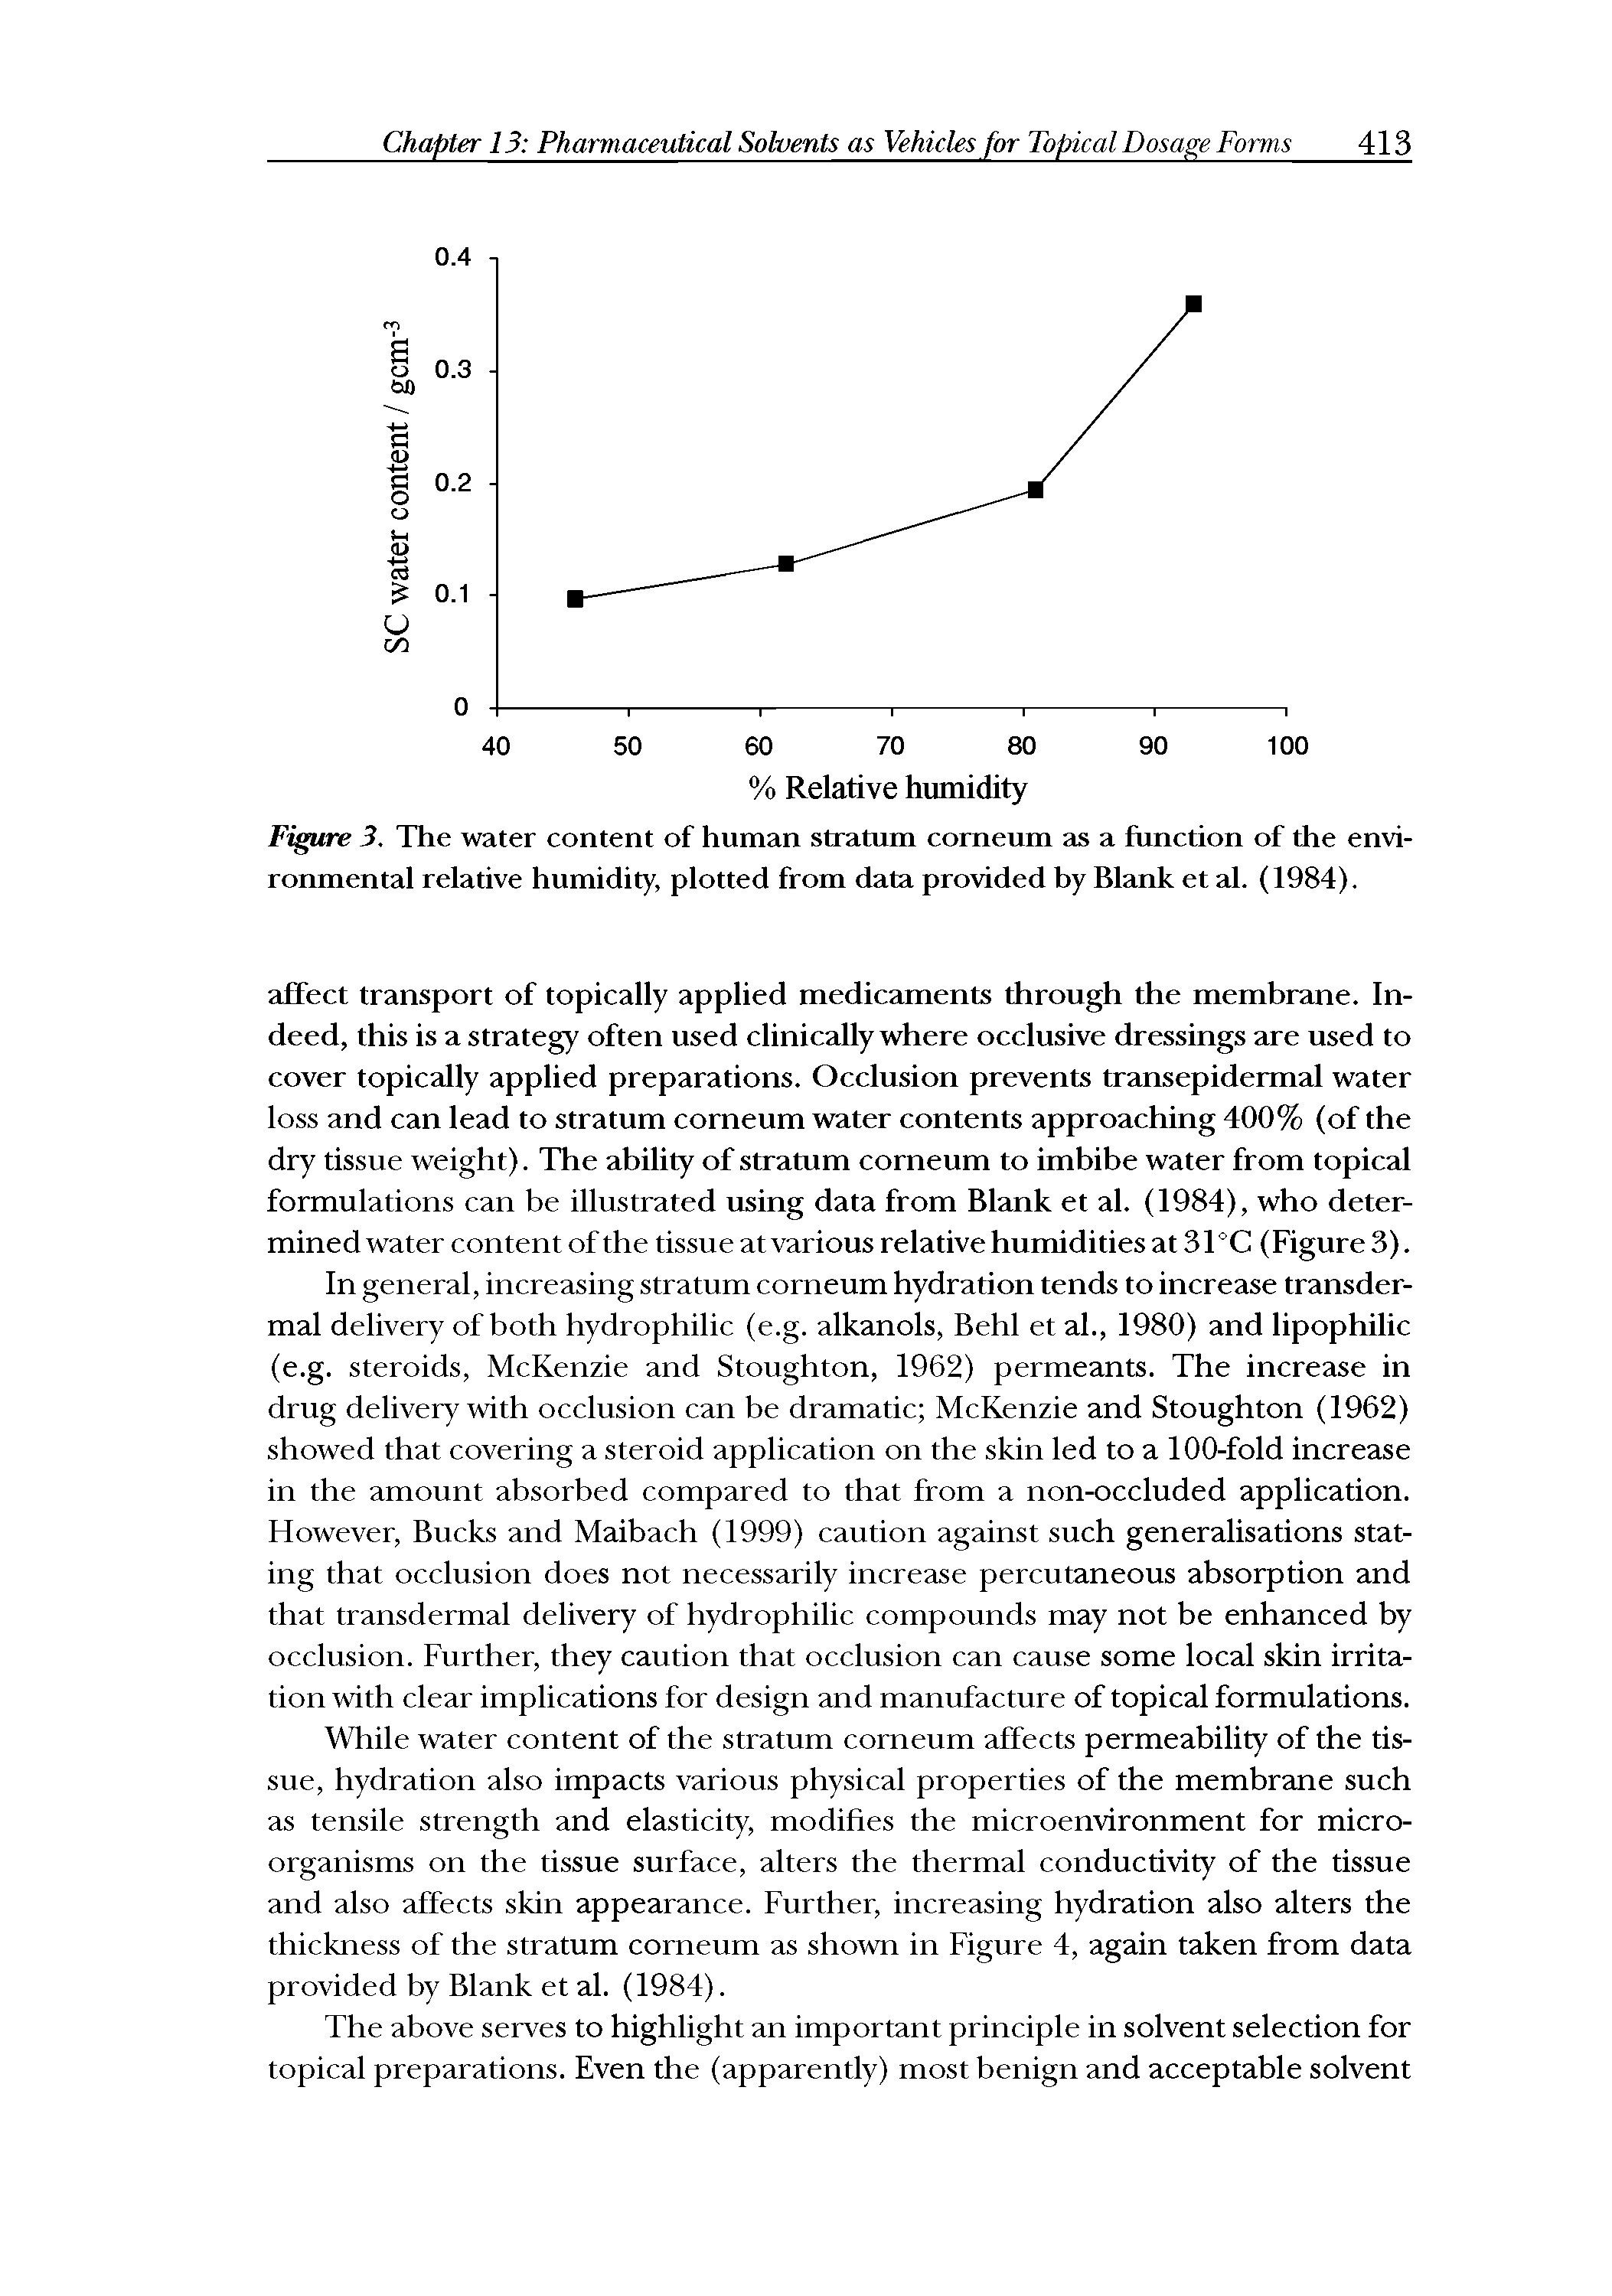 Figure 3. The water content of human stratum corneum as a function of the environmental relative humidity, plotted from data provided by Blank et al. (1984).